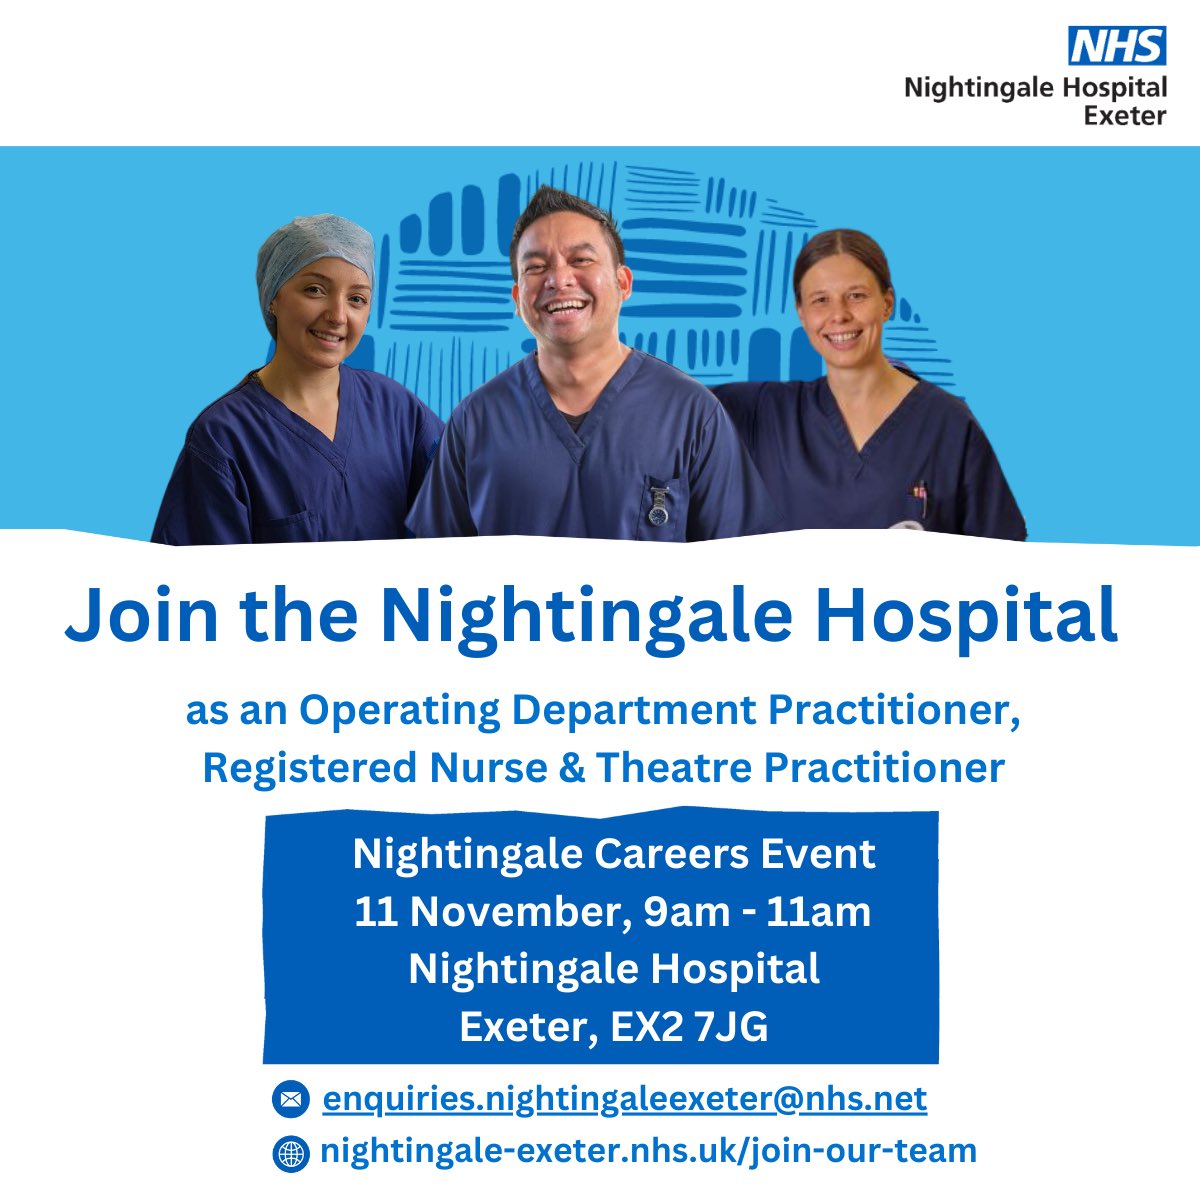 We are holding a recruitment open morning at the Nightingale on the 11th November 9-11am. Come and meet the teams and tour the site and services. Please click on the link for more information ➡️ nightingale-exeter.nhs.uk/join-our-team